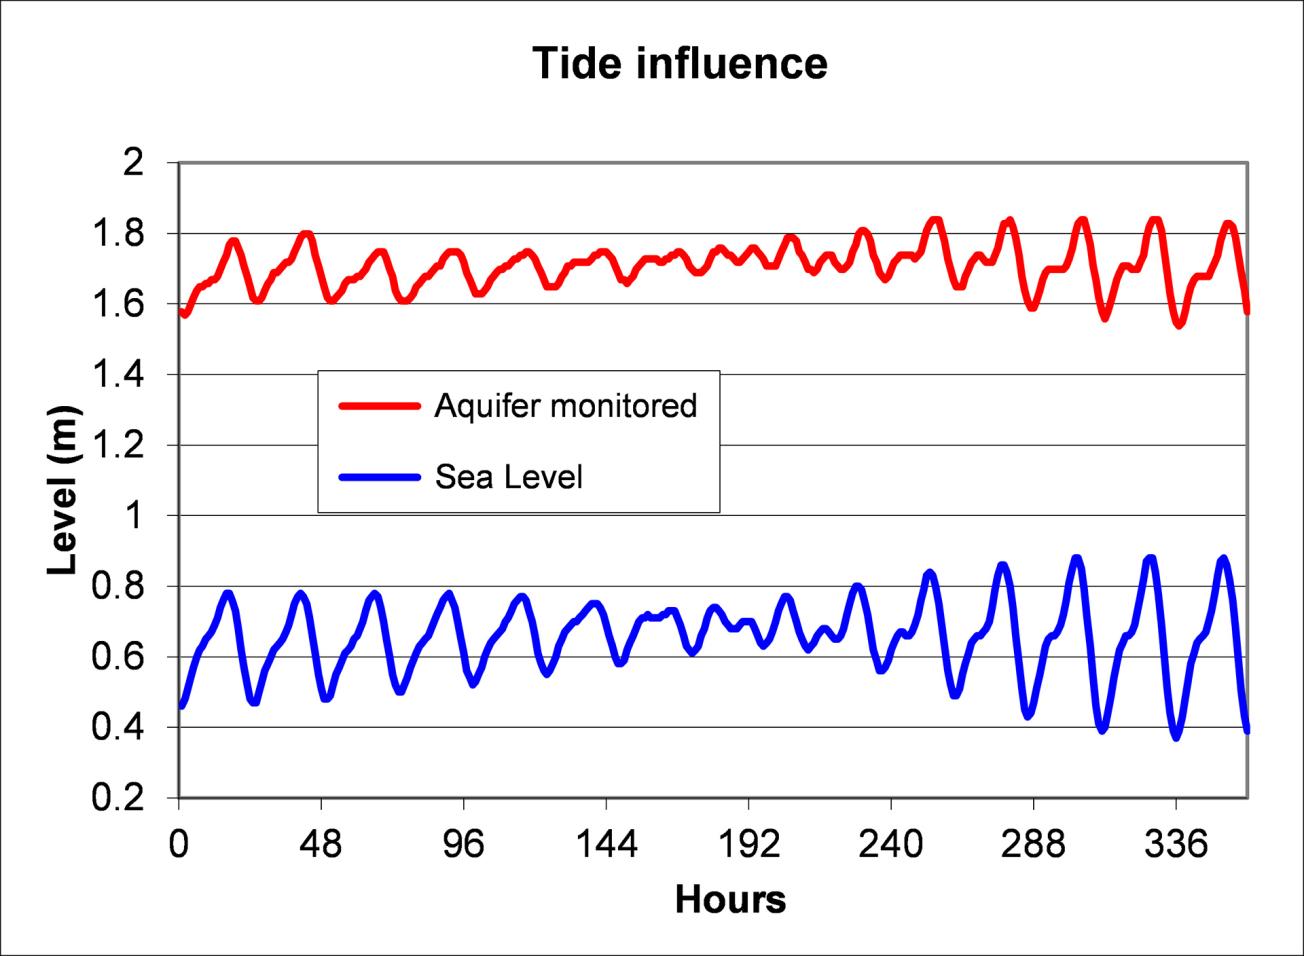 Influence of tides on the aquifer level in Martinique